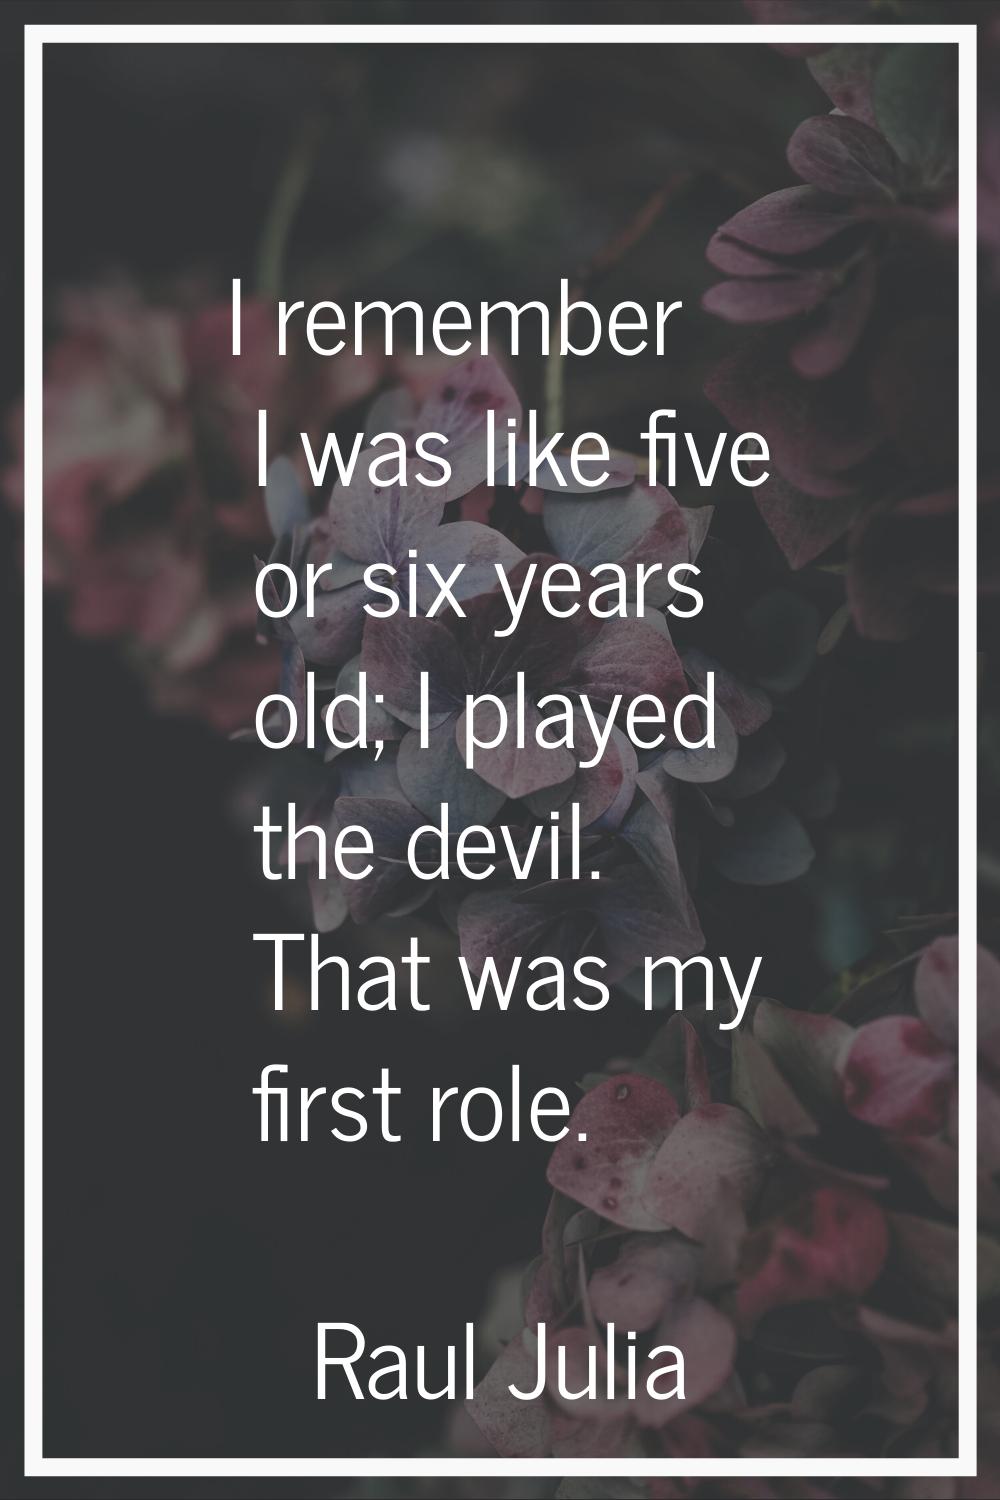 I remember I was like five or six years old; I played the devil. That was my first role.